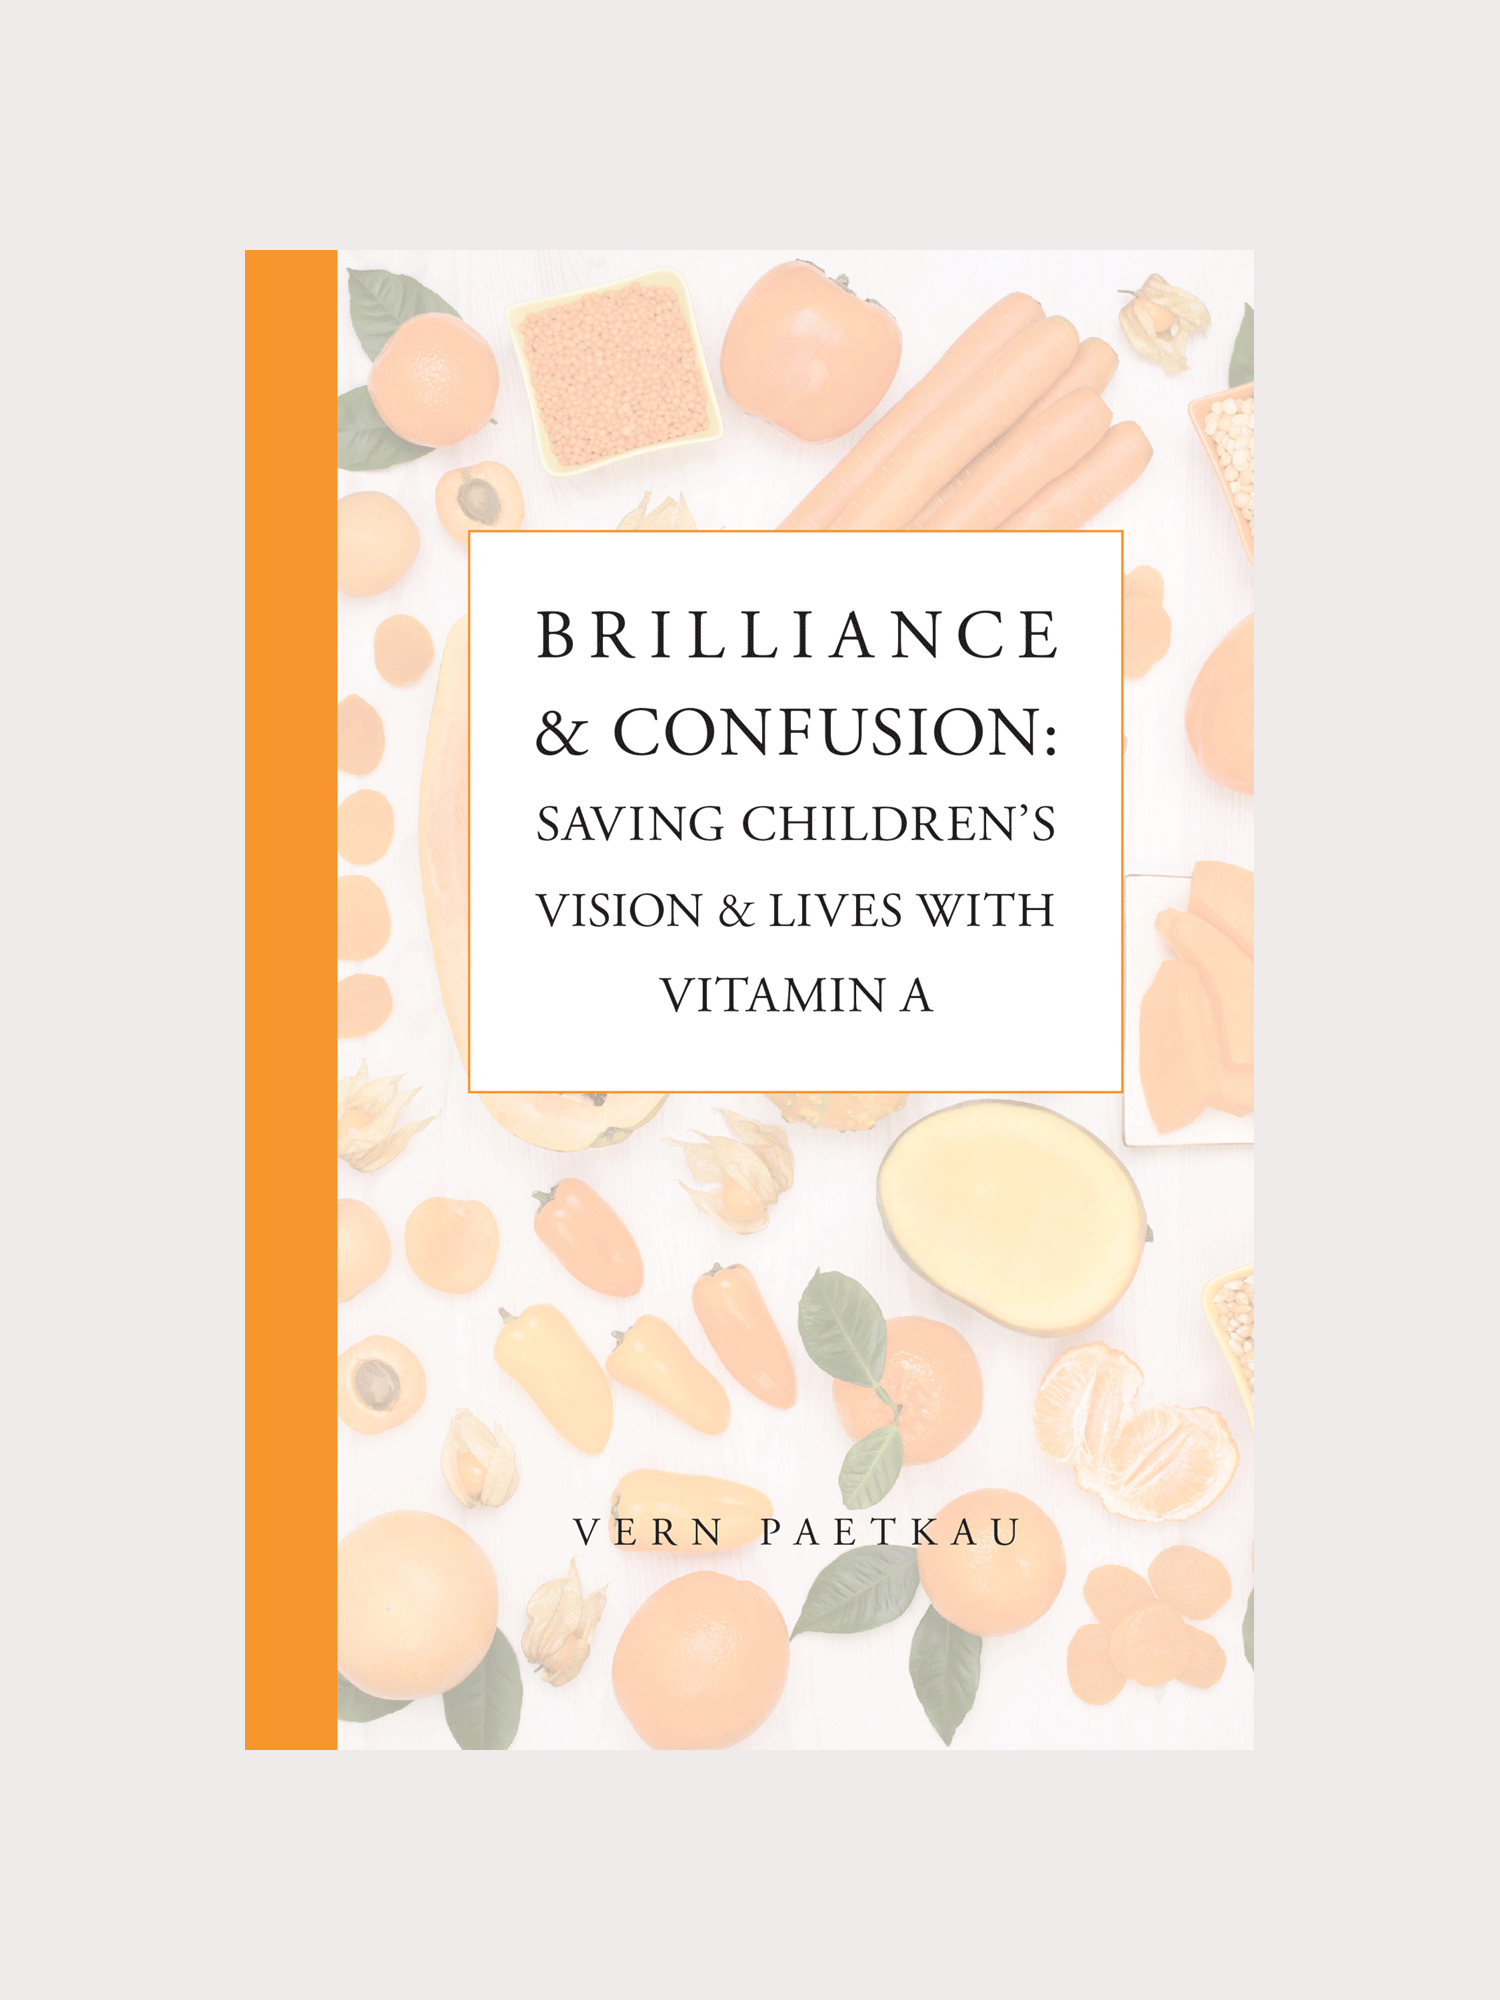 Book: Brilliance and Confusion by Vern Paetkau